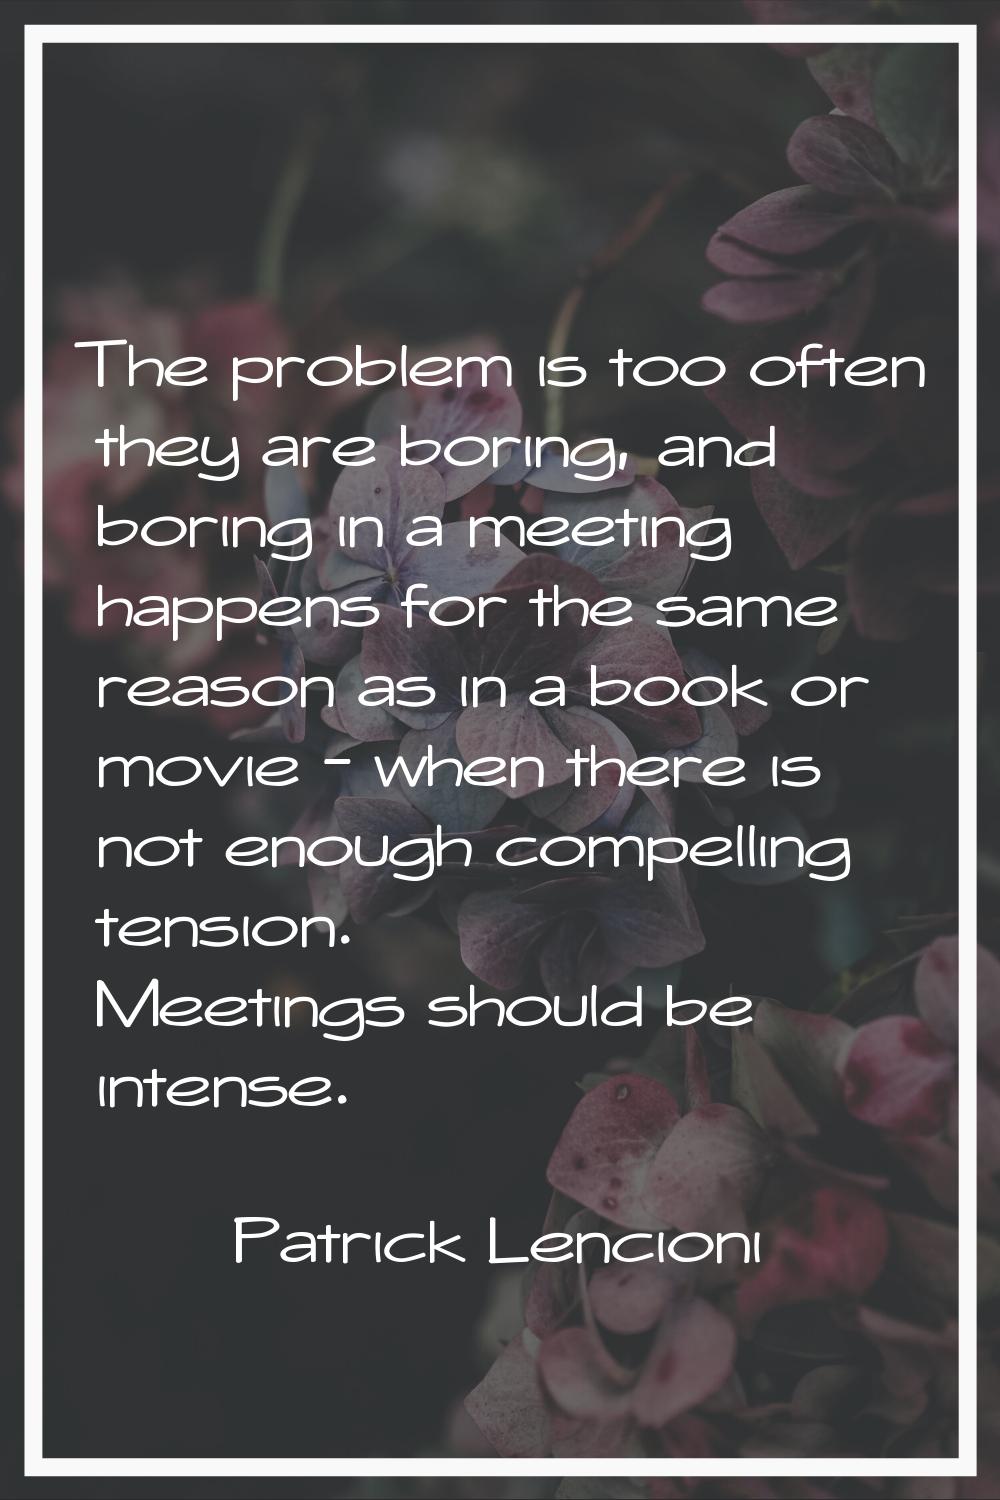 The problem is too often they are boring, and boring in a meeting happens for the same reason as in